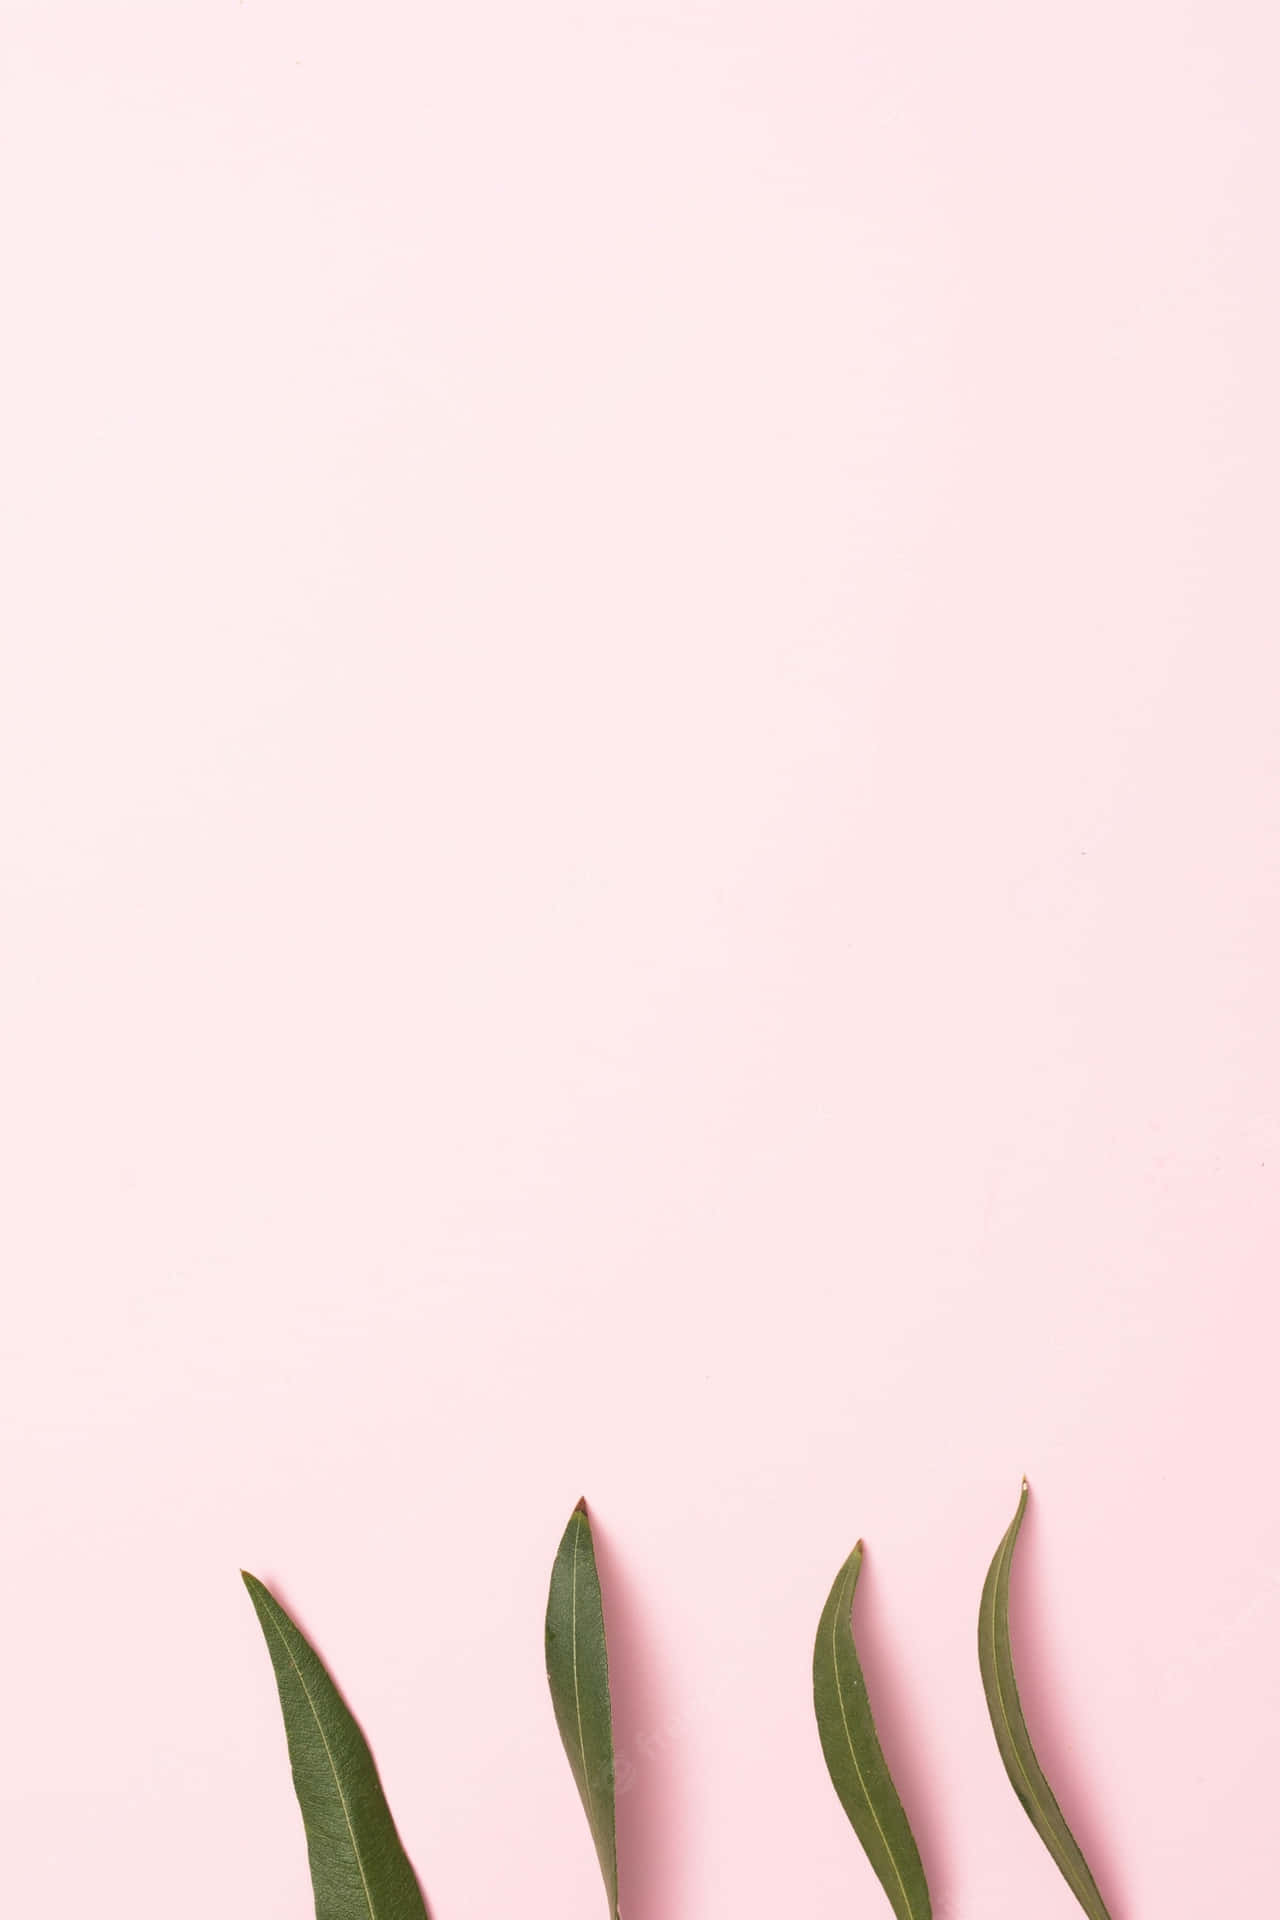 A minimalist image with bright pink shades Wallpaper